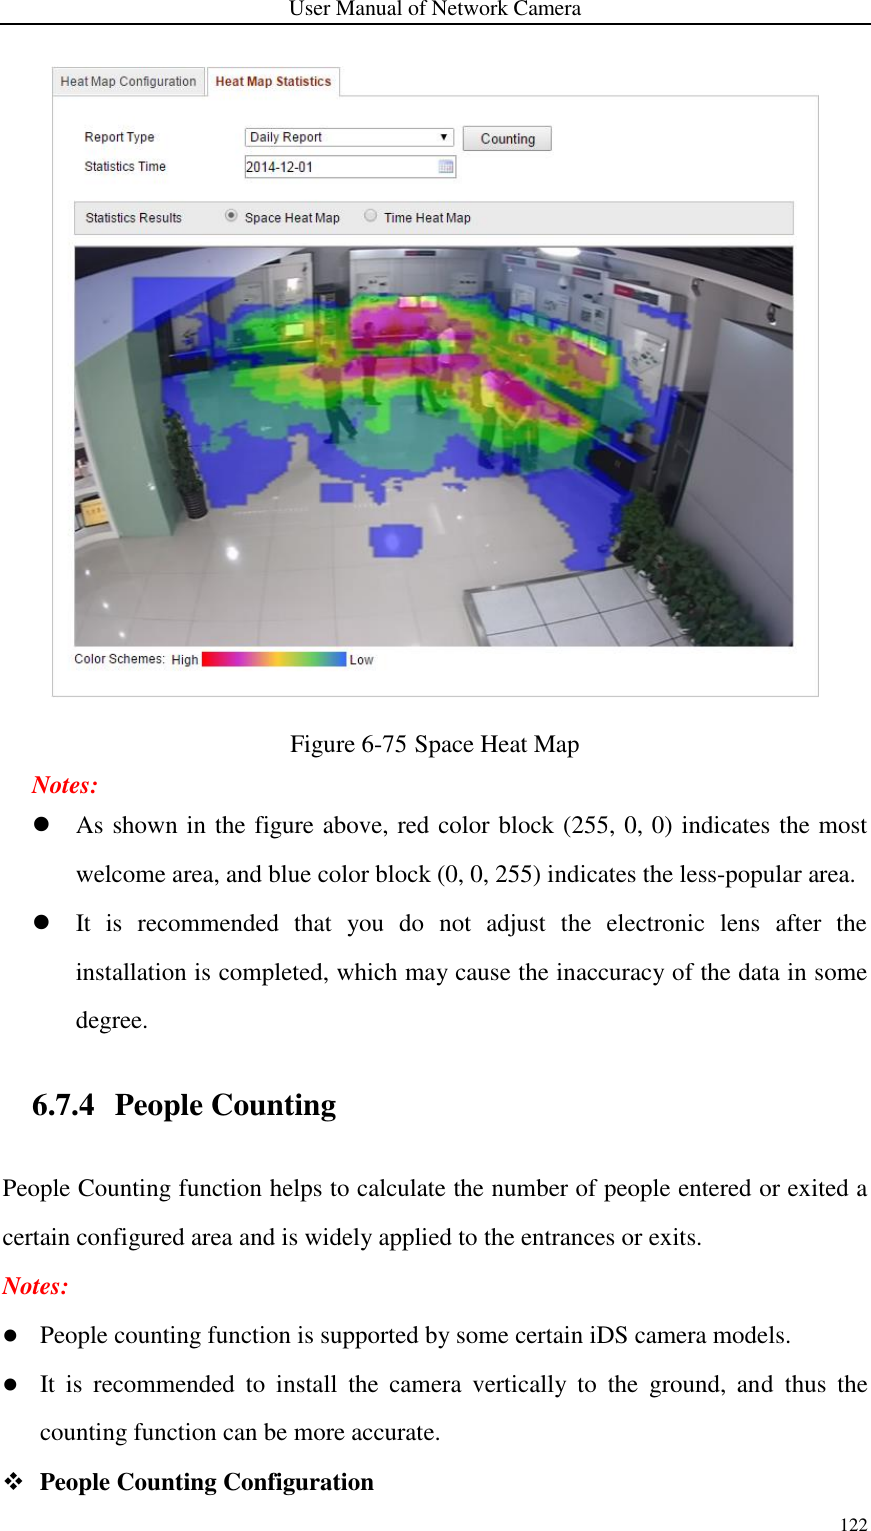 User Manual of Network Camera 122   Figure 6-75 Space Heat Map Notes:  As shown in the figure above, red color block (255, 0, 0) indicates the most welcome area, and blue color block (0, 0, 255) indicates the less-popular area.  It  is  recommended  that  you  do  not  adjust  the  electronic  lens  after  the installation is completed, which may cause the inaccuracy of the data in some degree. 6.7.4 People Counting People Counting function helps to calculate the number of people entered or exited a certain configured area and is widely applied to the entrances or exits. Notes:    People counting function is supported by some certain iDS camera models.  It  is  recommended  to  install  the  camera  vertically  to  the  ground,  and  thus  the counting function can be more accurate.  People Counting Configuration 